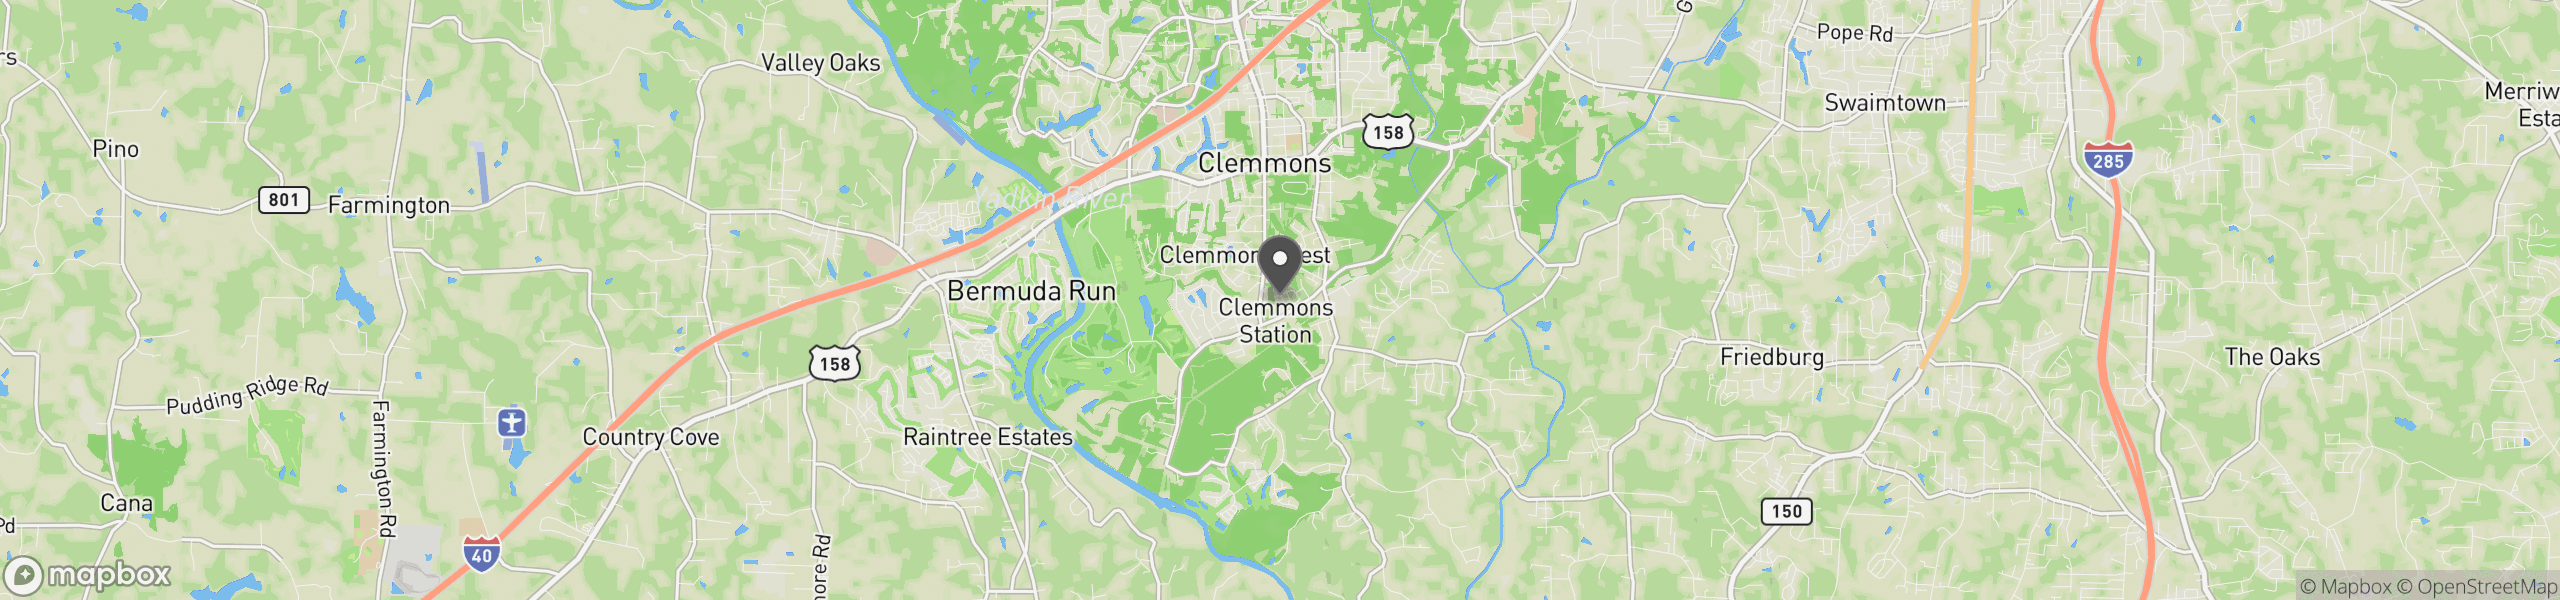 Clemmons, NC 27012